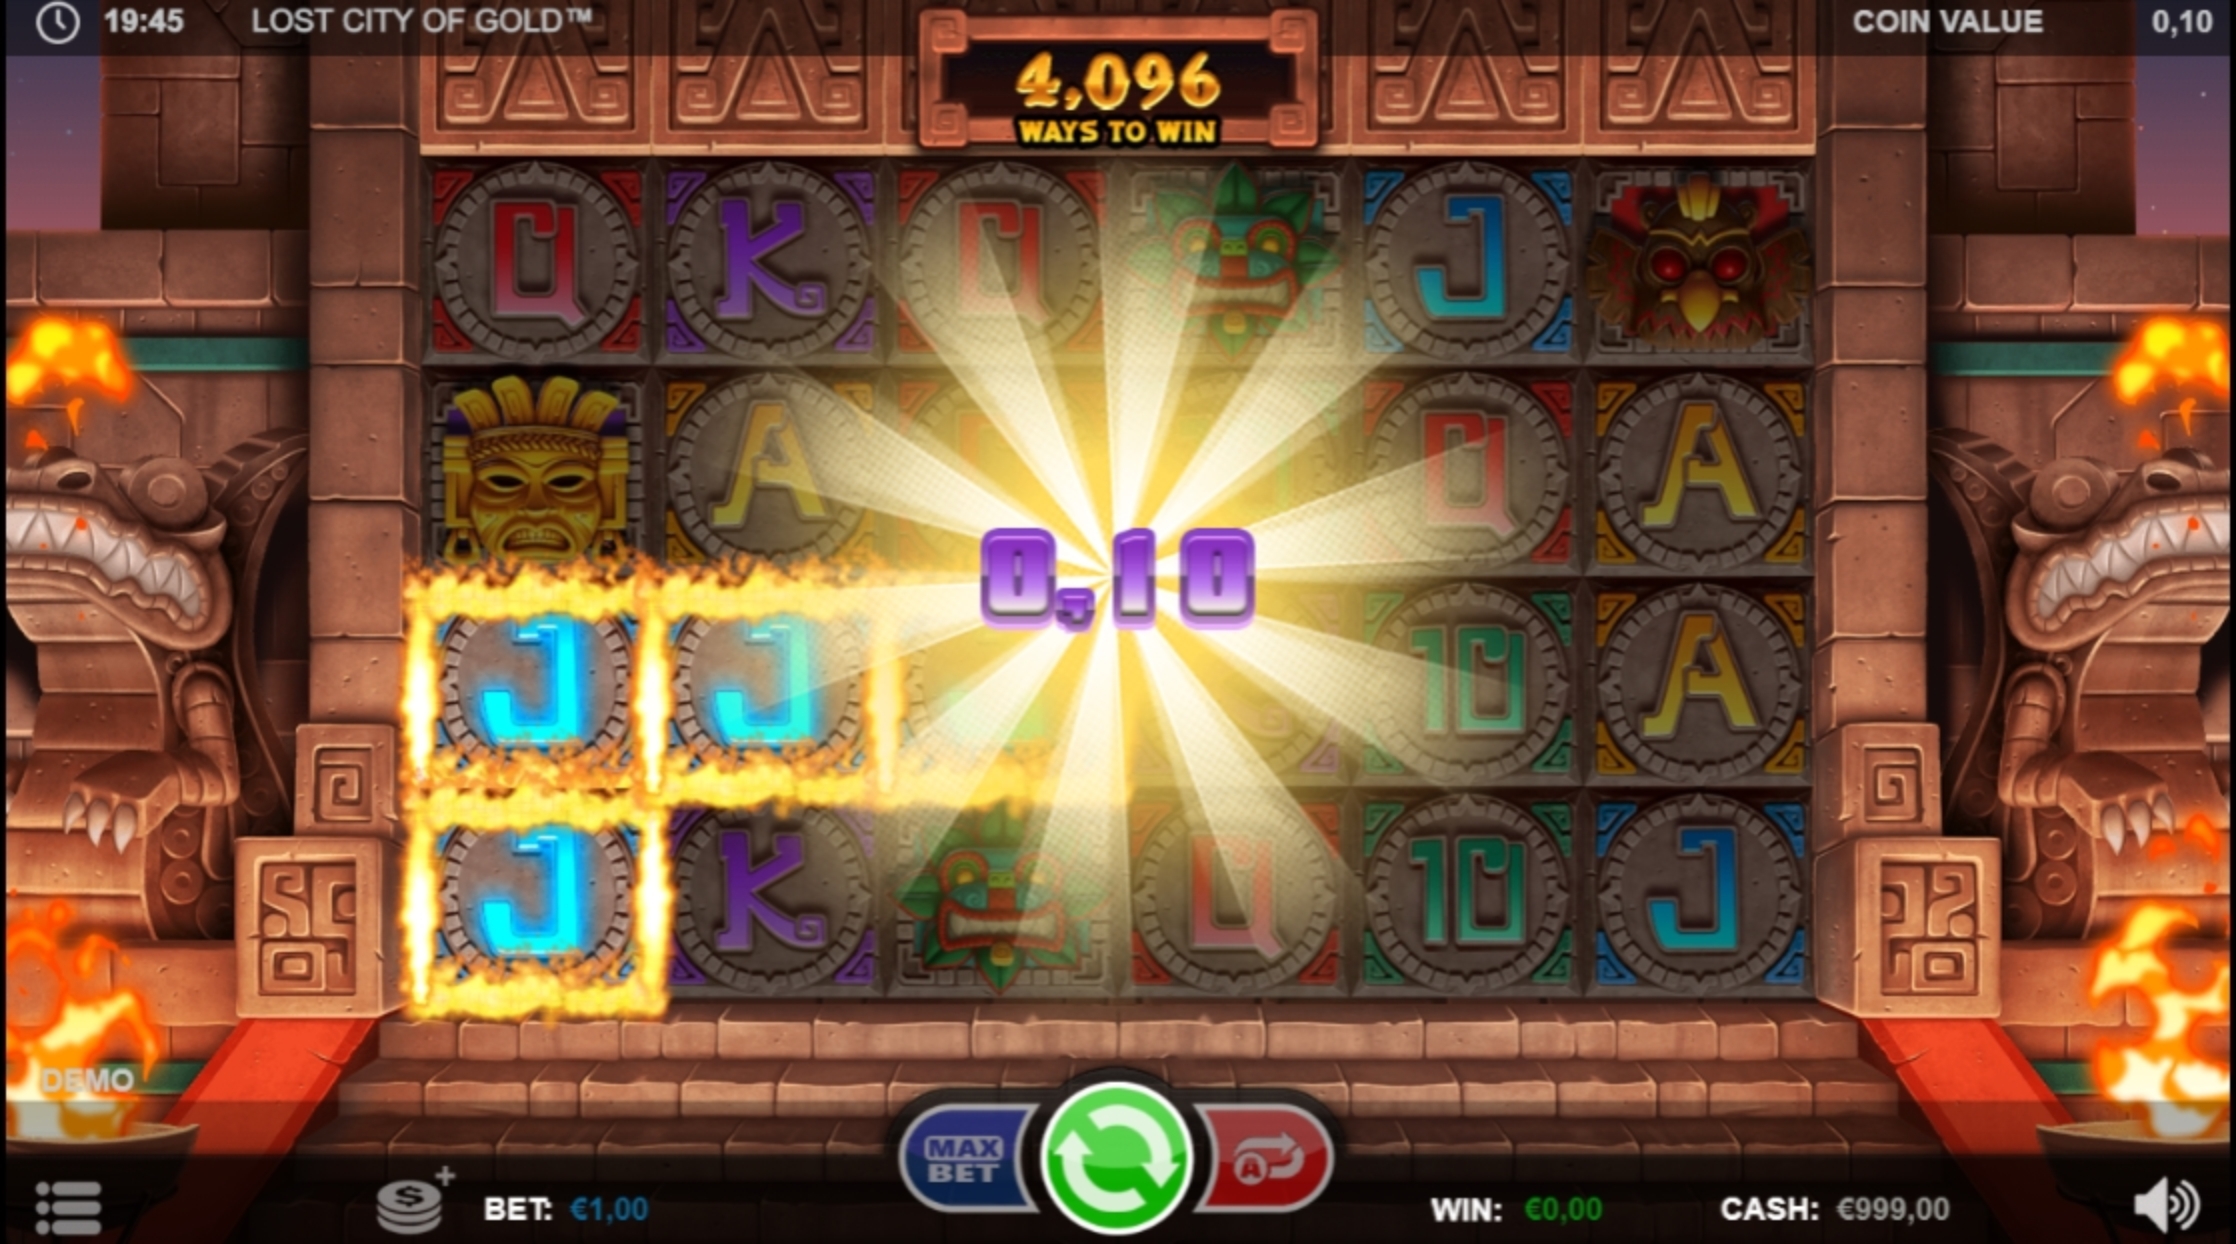 Win Money in Lost City of Gold Free Slot Game by Betsson Group